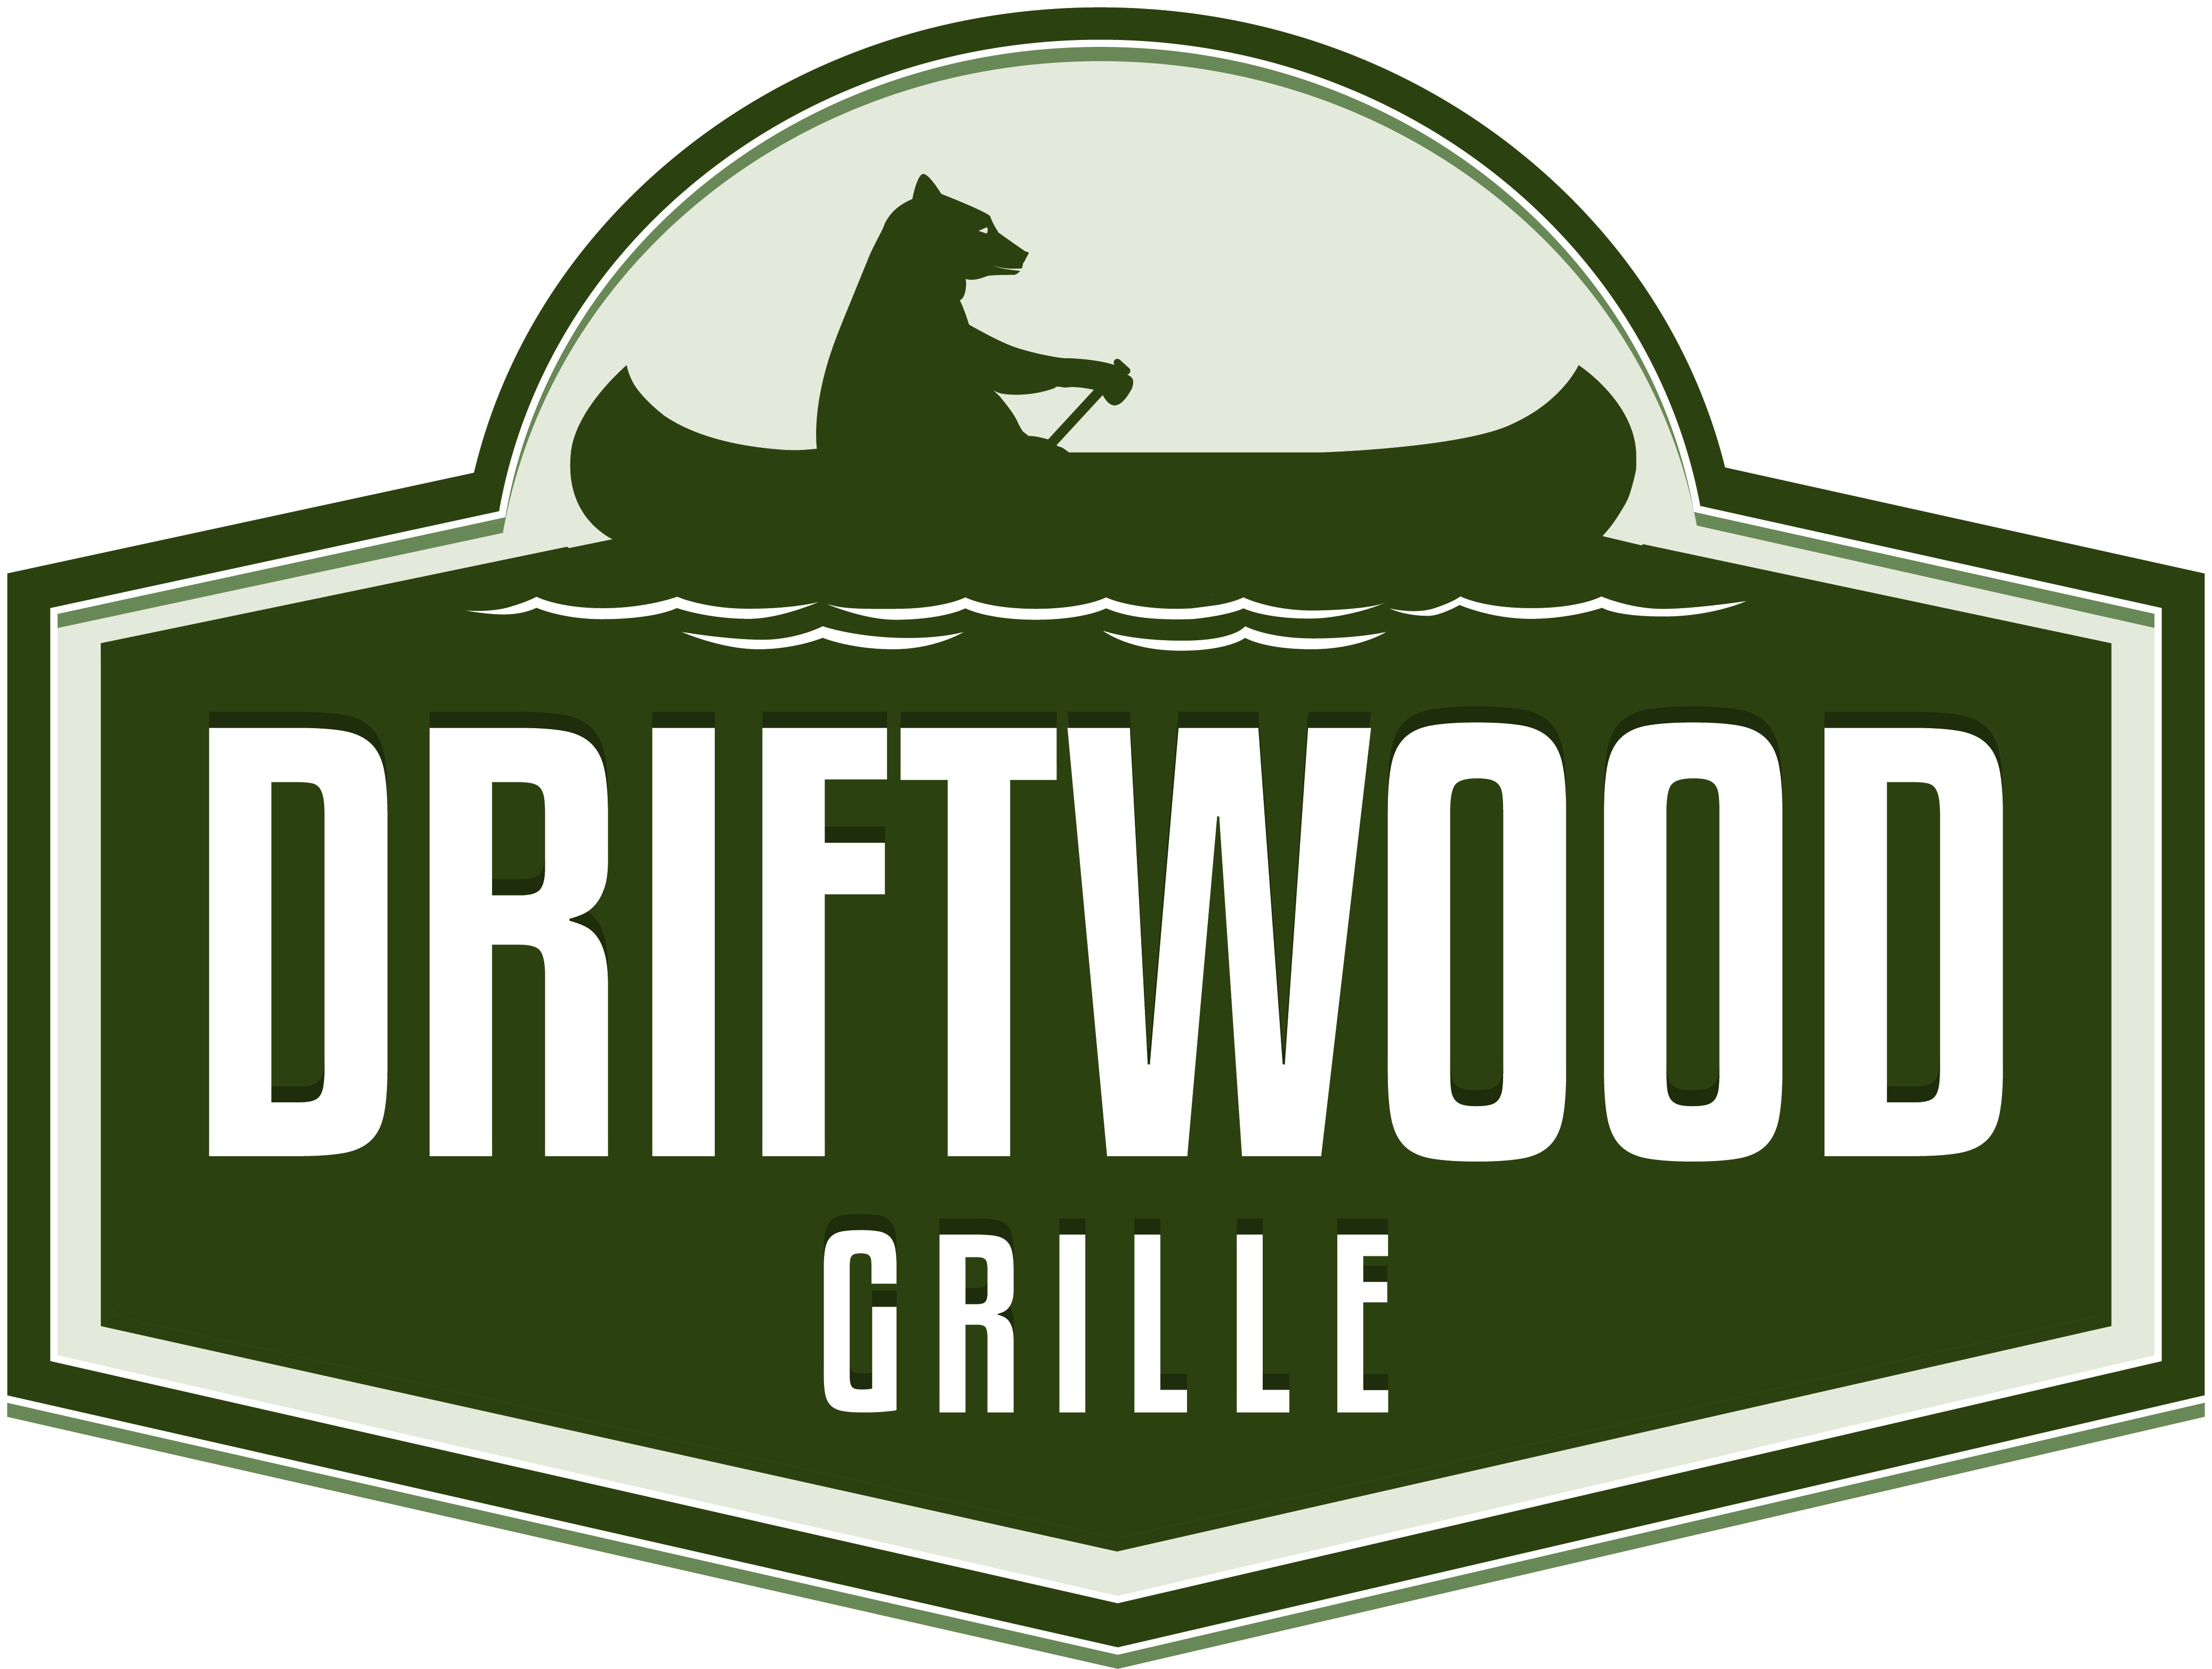 DRIFTWOOD GRILLE